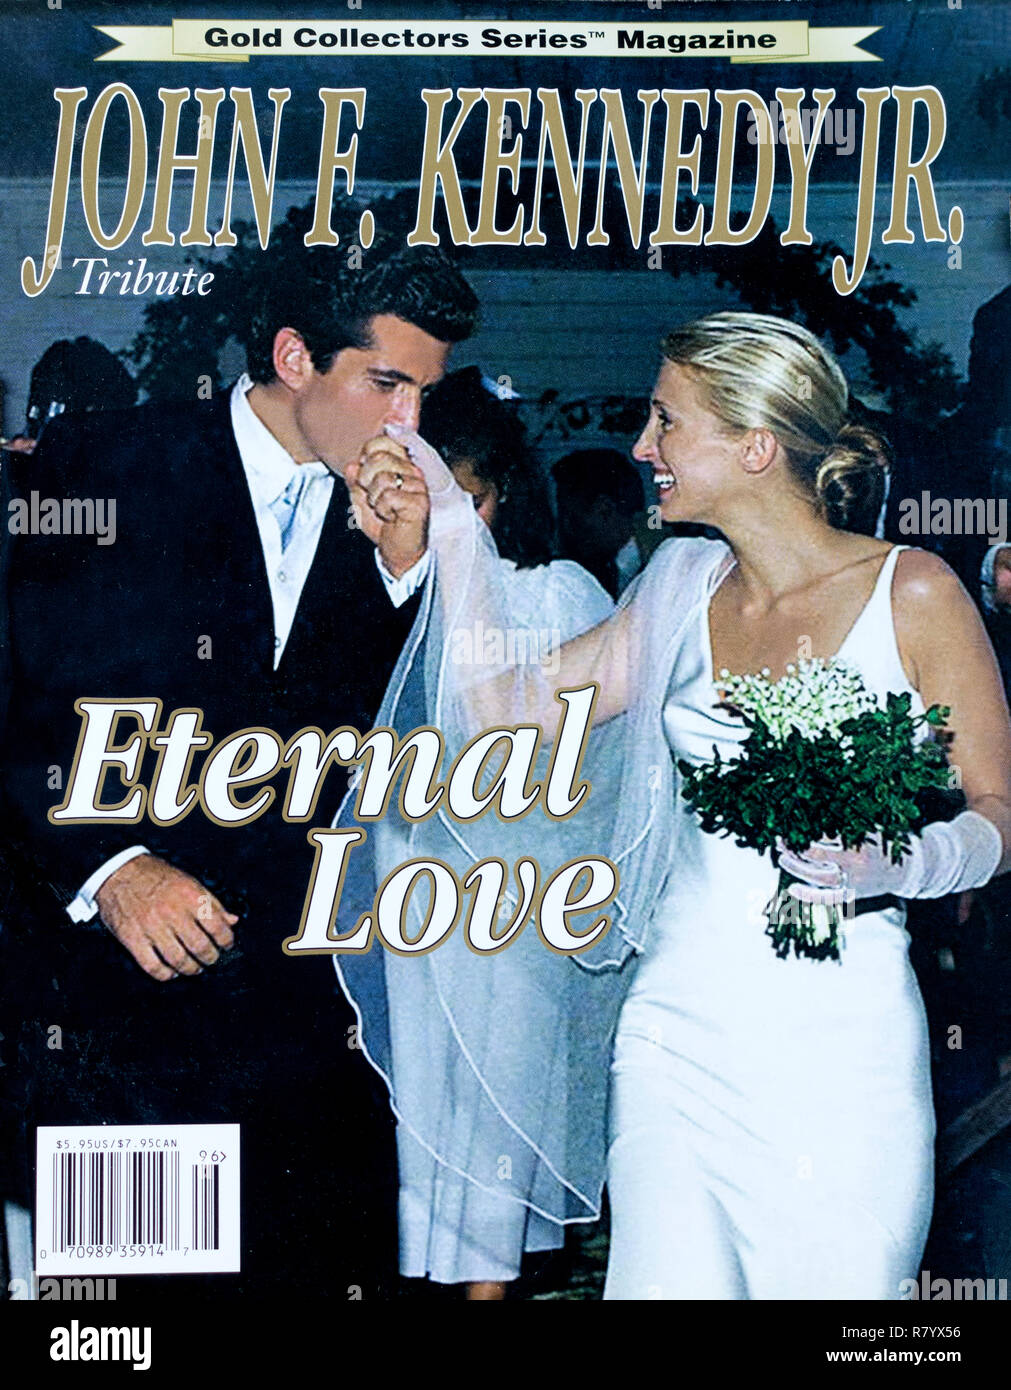 Gold Collector Series Magazine with cover photo of John F. Kennedy Jr. and Carolyn Bessette wedding. St Paul Minnesota MN USA Stock Photo